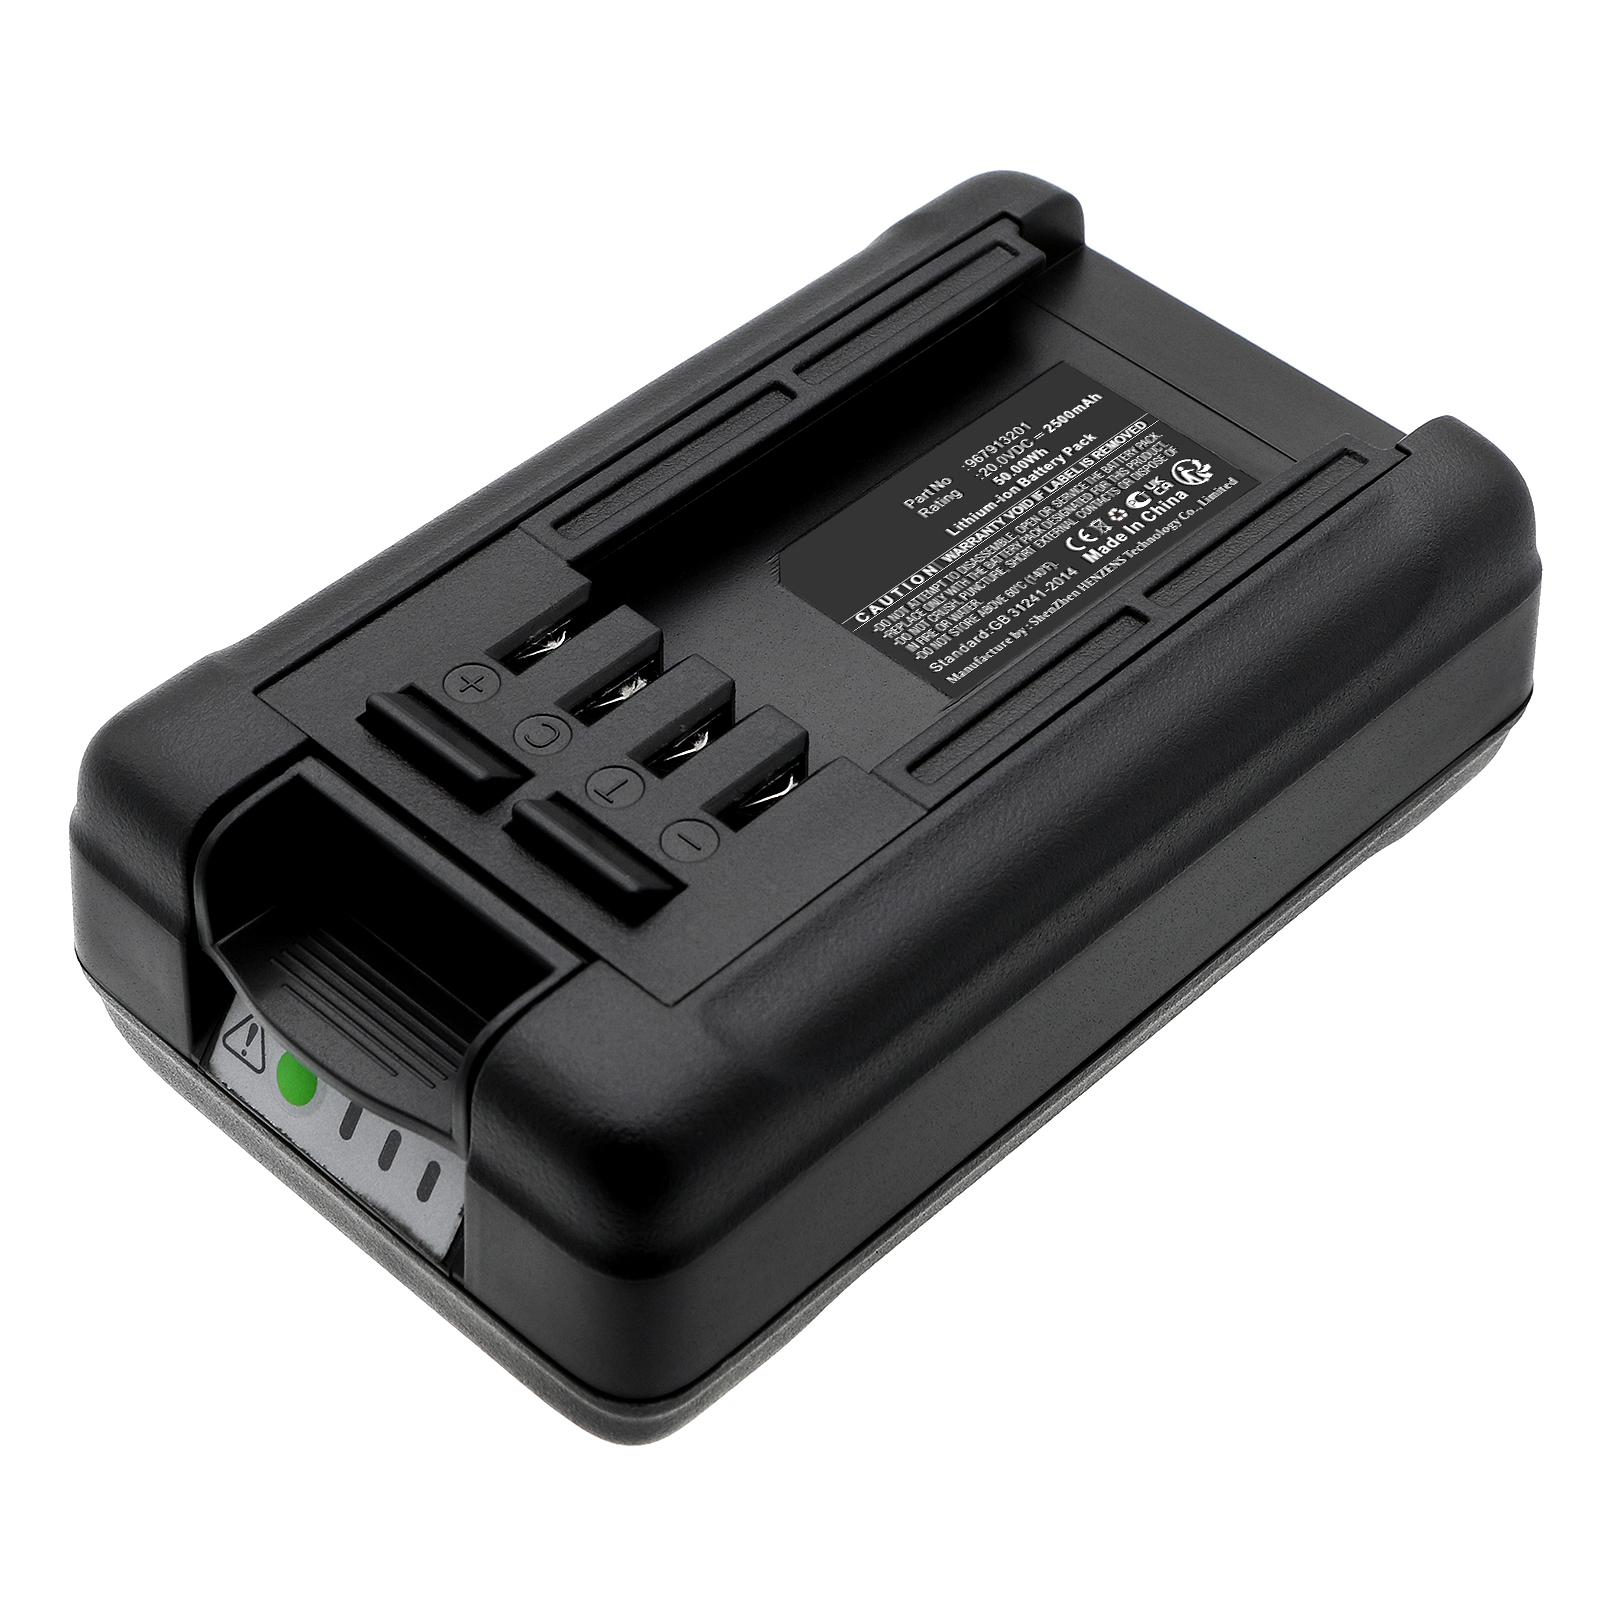 Synergy Digital Lawn Mower Battery, Compatible with Flymo BA01 Lawn Mower Battery (Li-ion, 20V, 2500mAh)